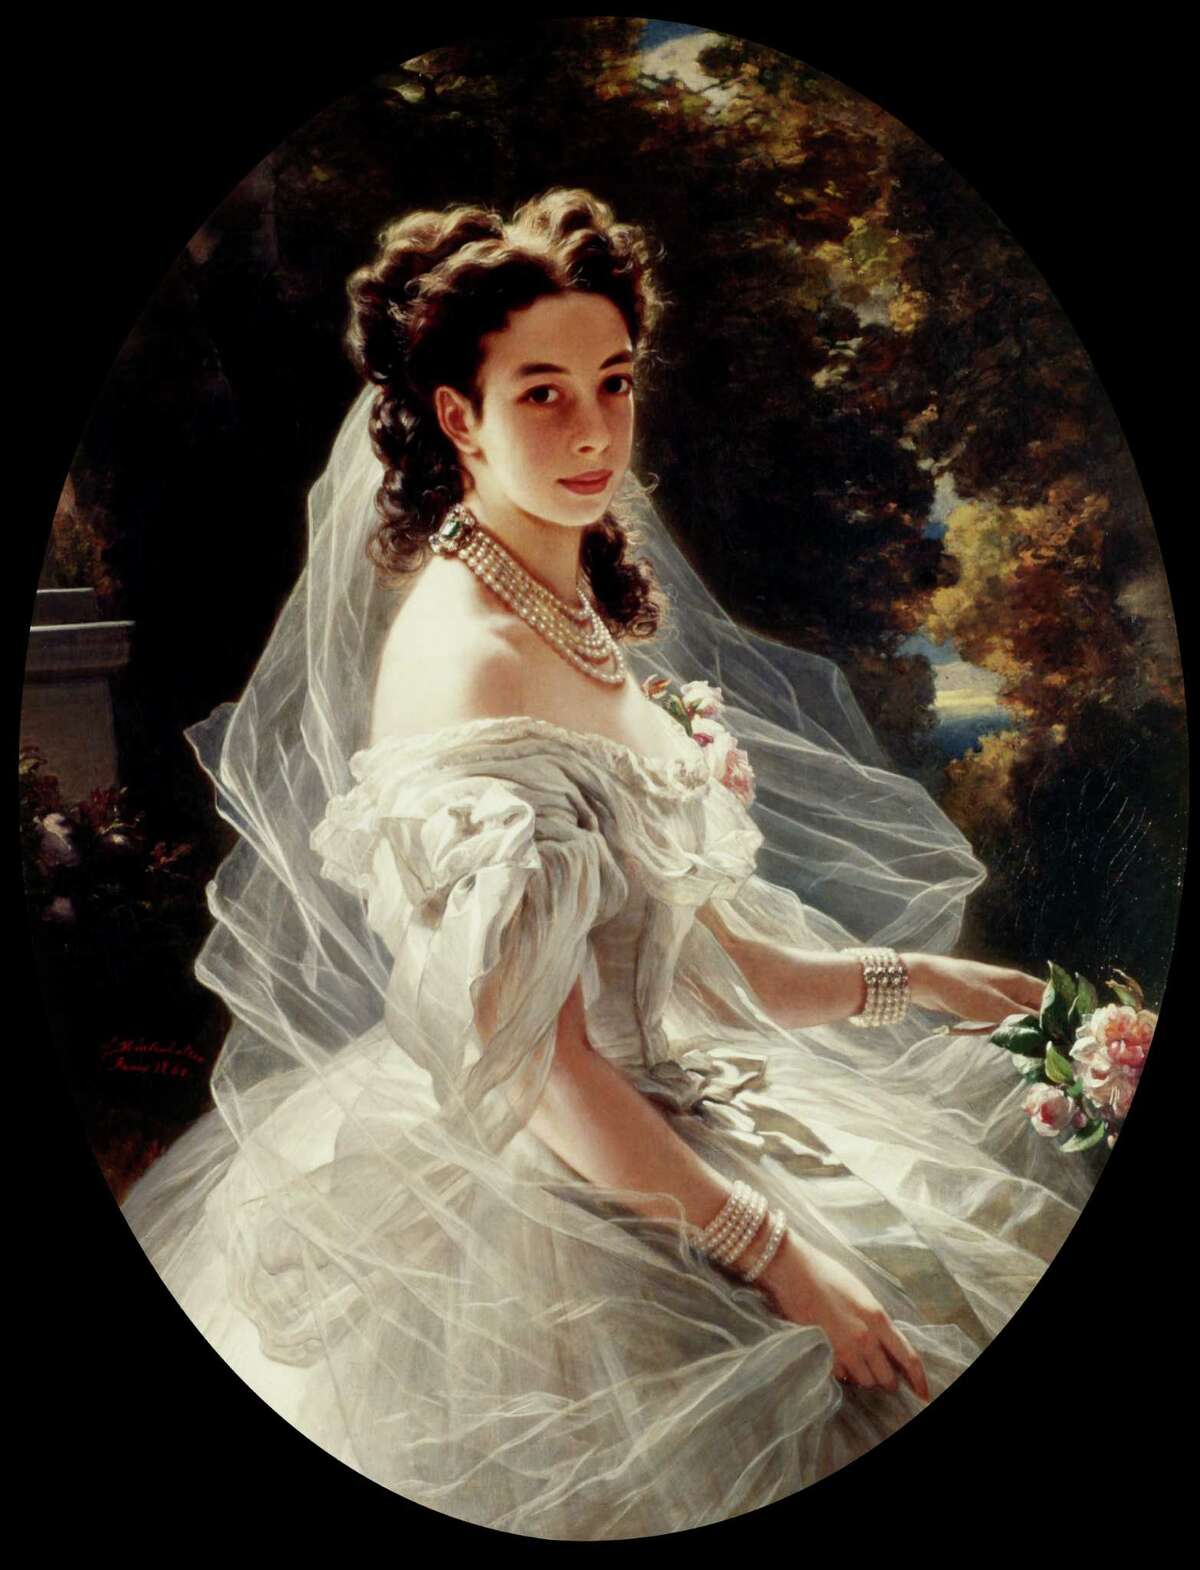 In Franz X. Winterhalter's portrait of Pauline Sándor, the Princess of Metternich wears a tulle dress that probably was designed by Charles Frederick Worth.